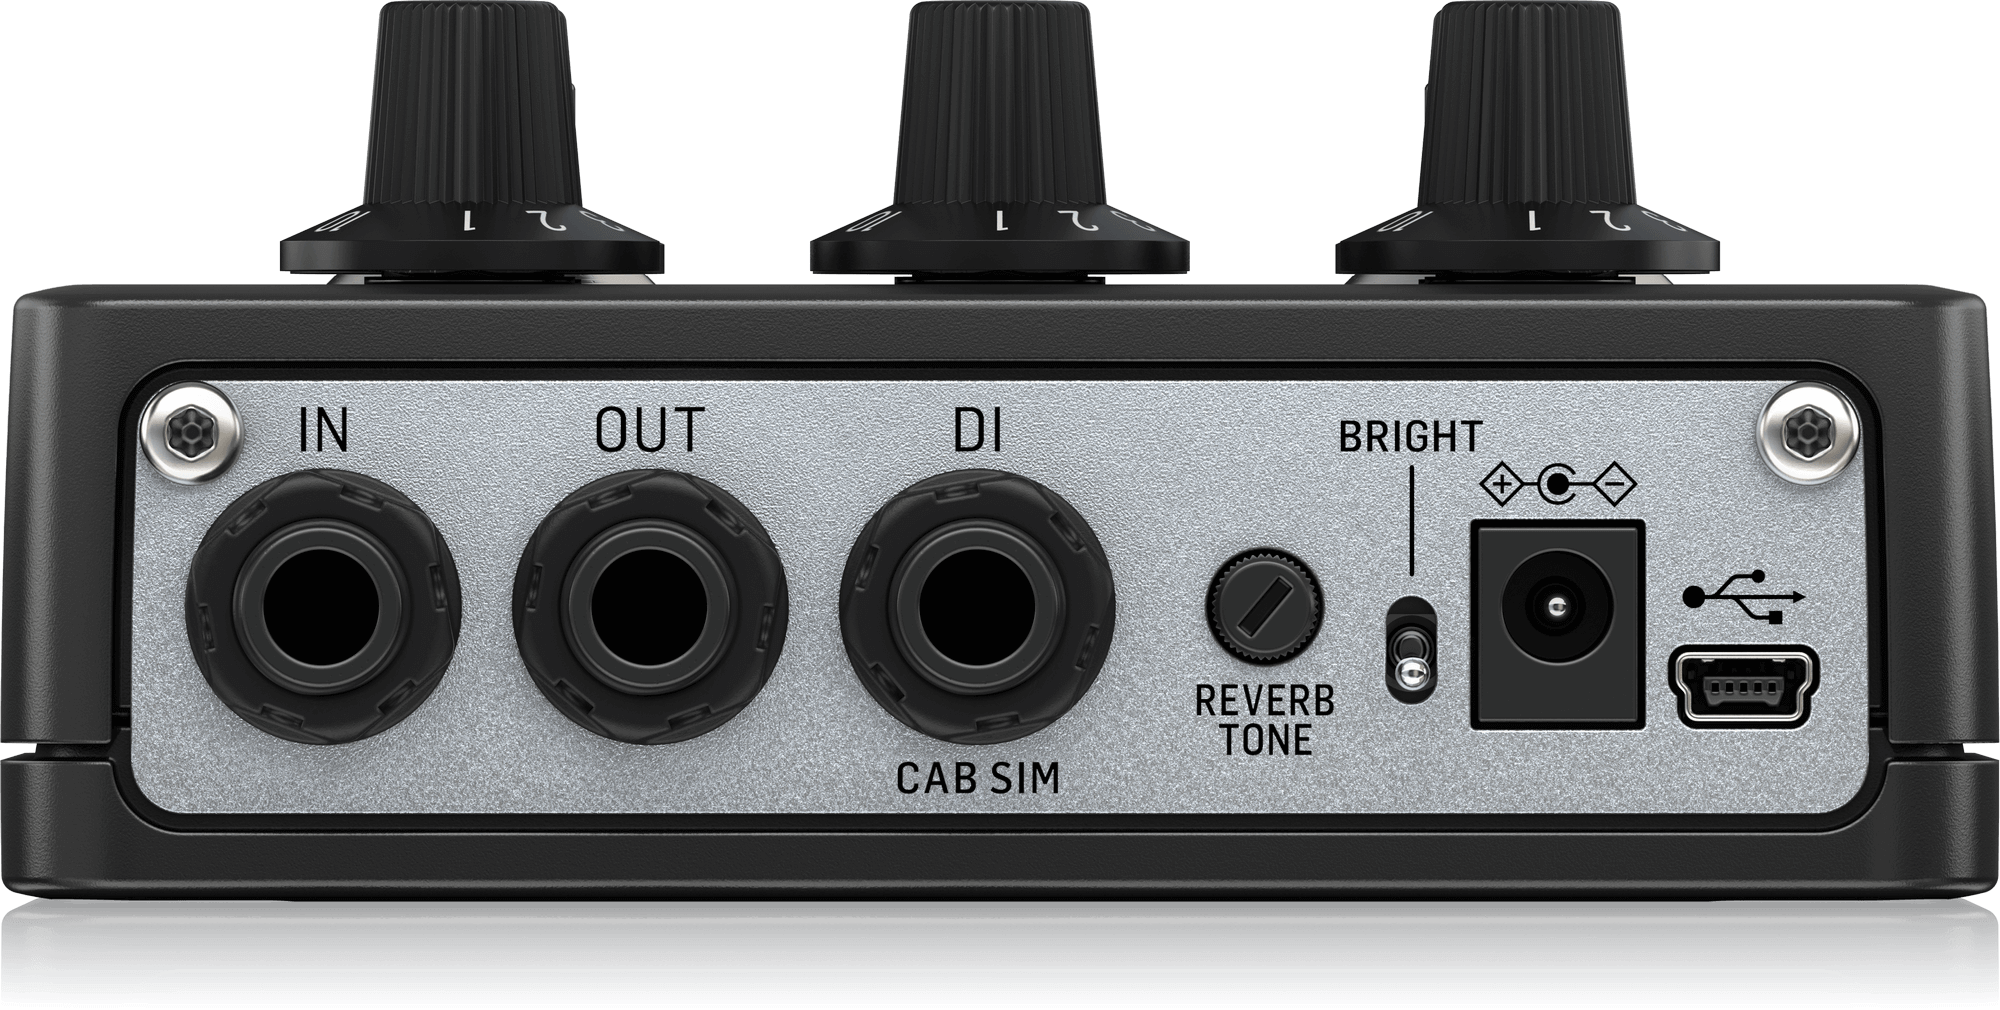 TC Electronic | Product | COMBO DELUXE 65' PREAMP